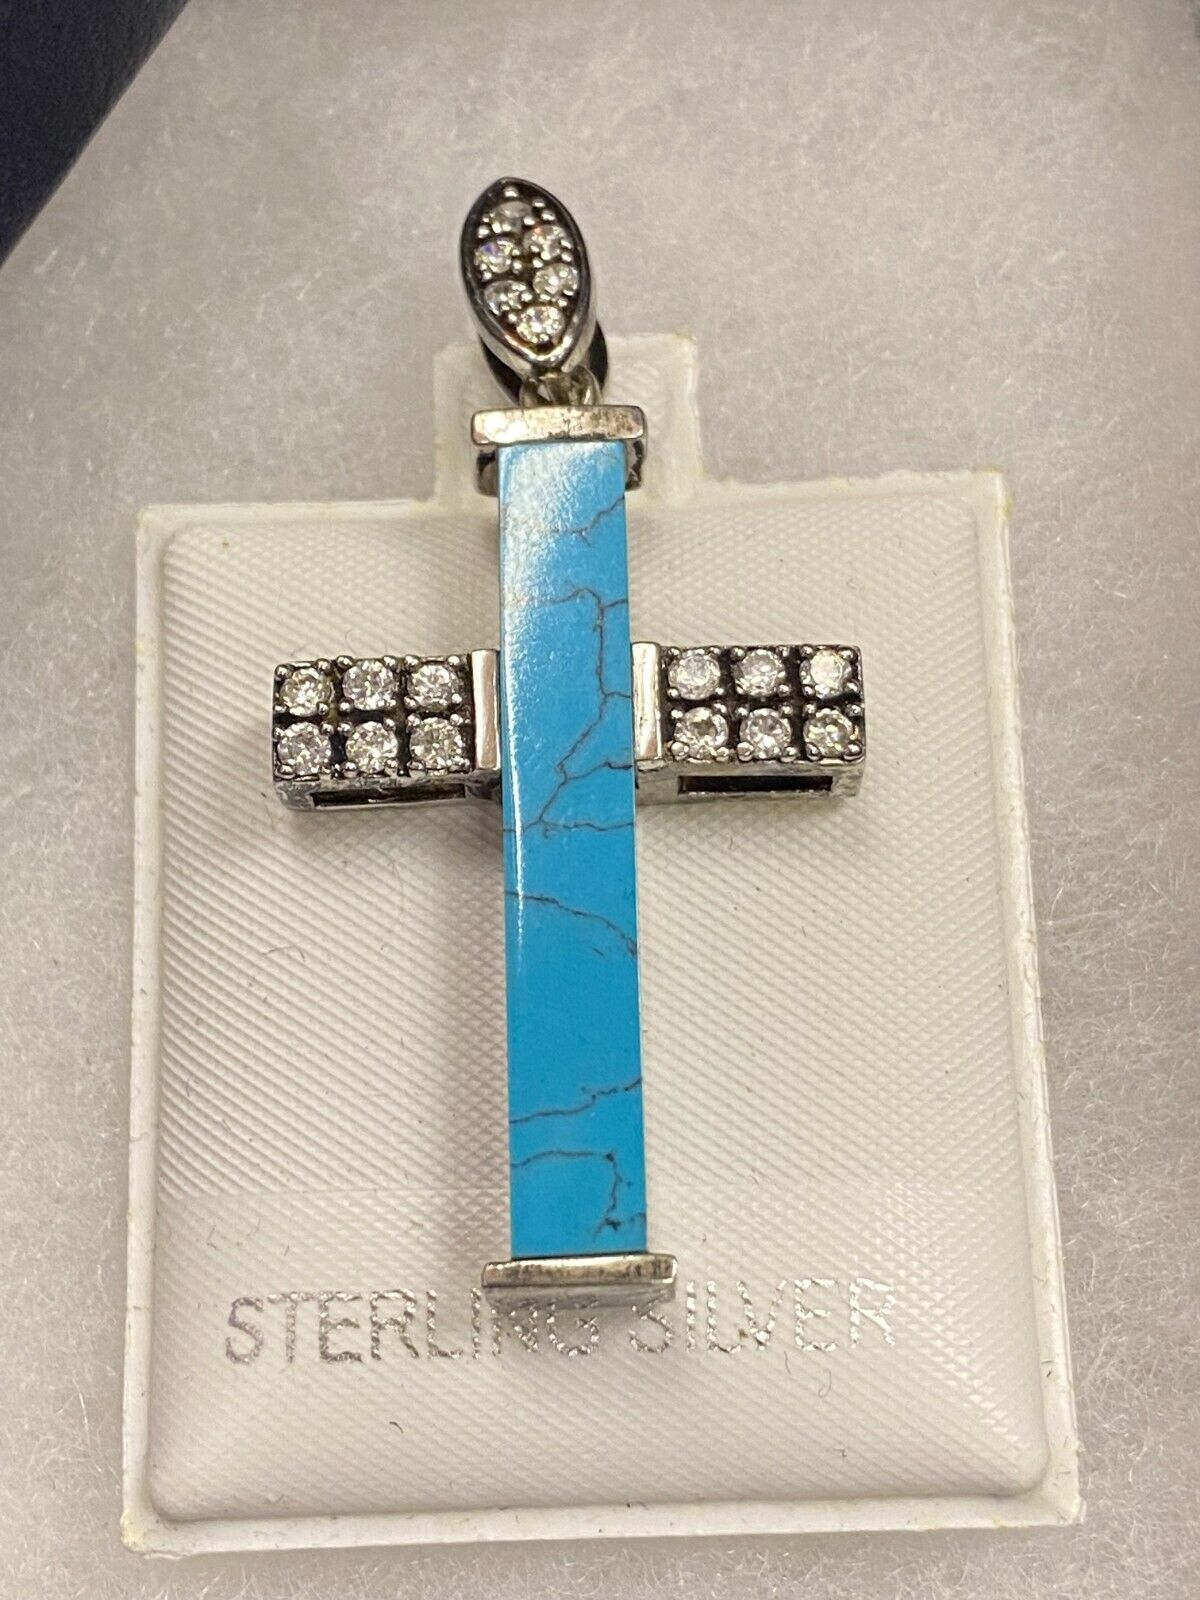 VINTAGE 925 STERLING SILVER  GENUINE TURQUOISE CZ STONES CROSS CHARM PENDANT NEW